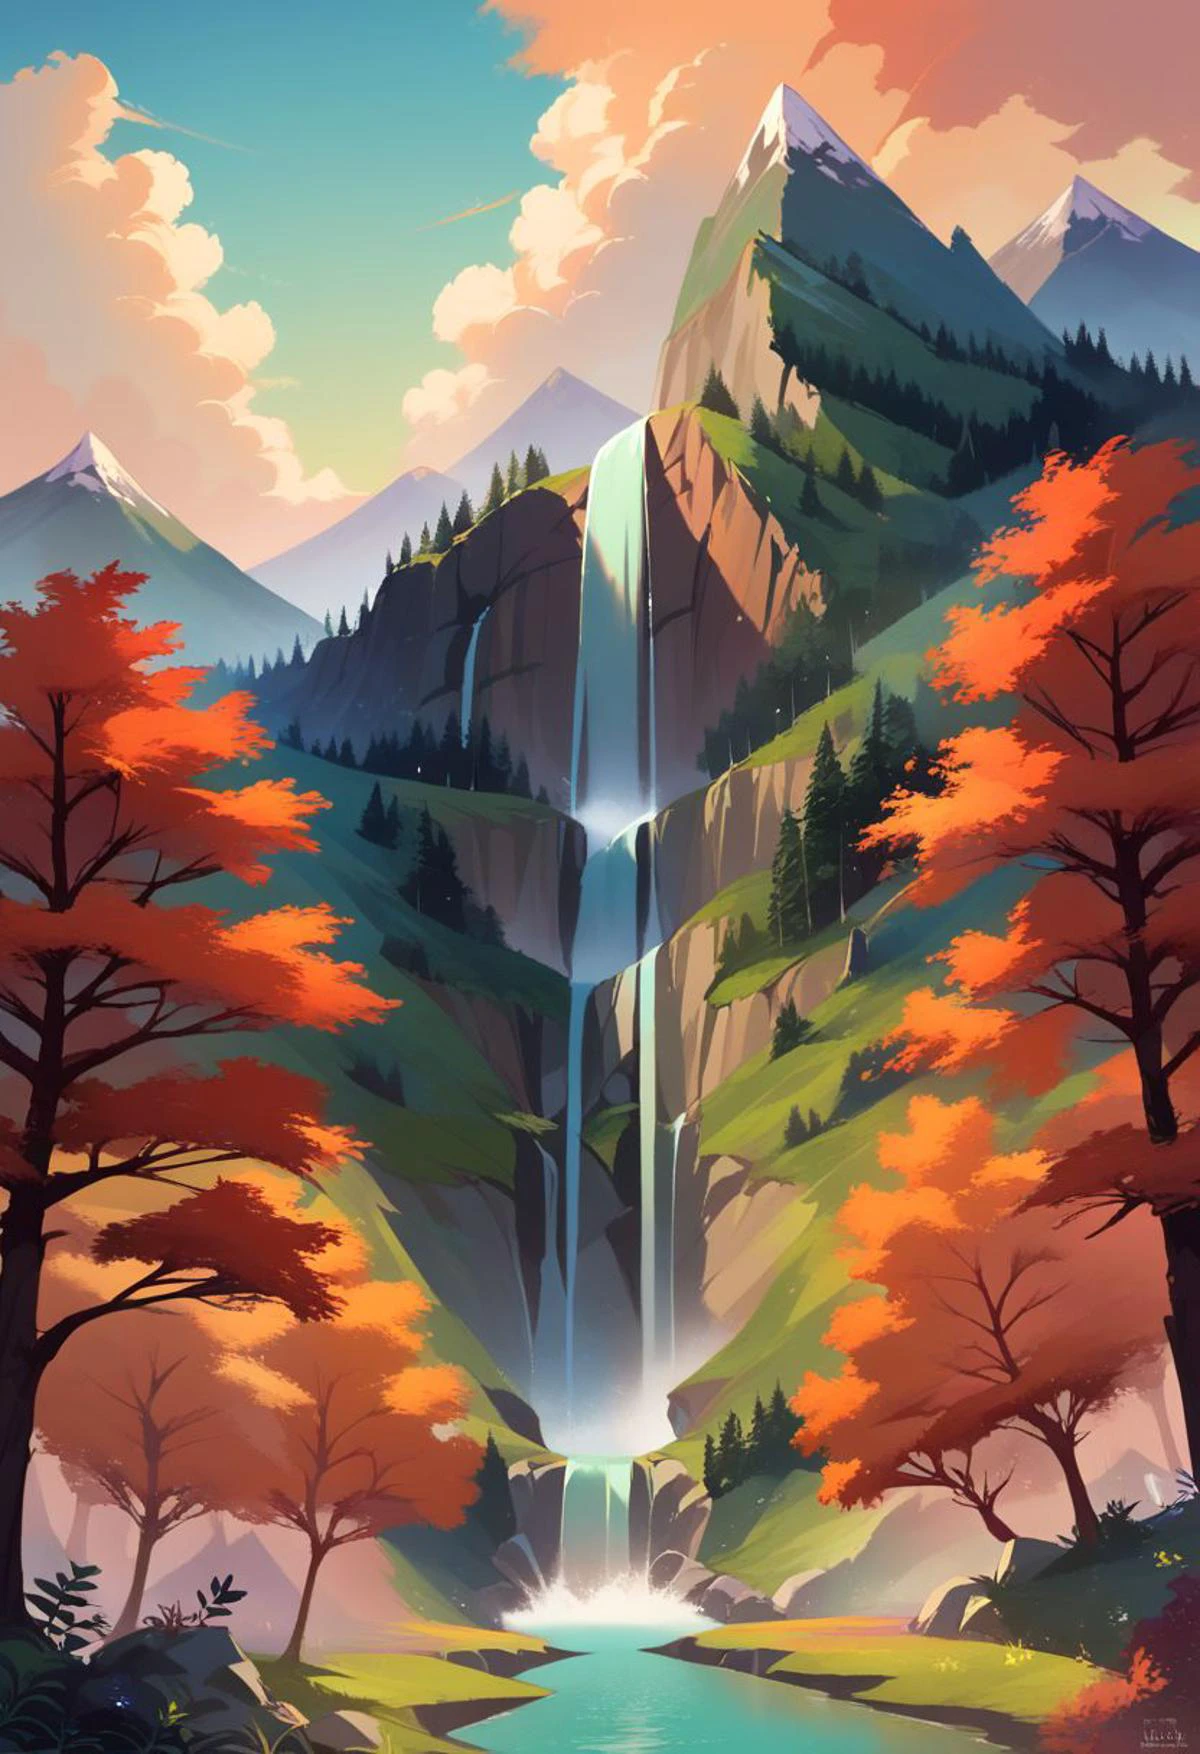 score_9, score_8_up, score_7_up, score_6_up, score_5_up, score_4_up, waterfall, mountains, forest, wind, fire, masterpiece, source_painted_concept_art
BREAK